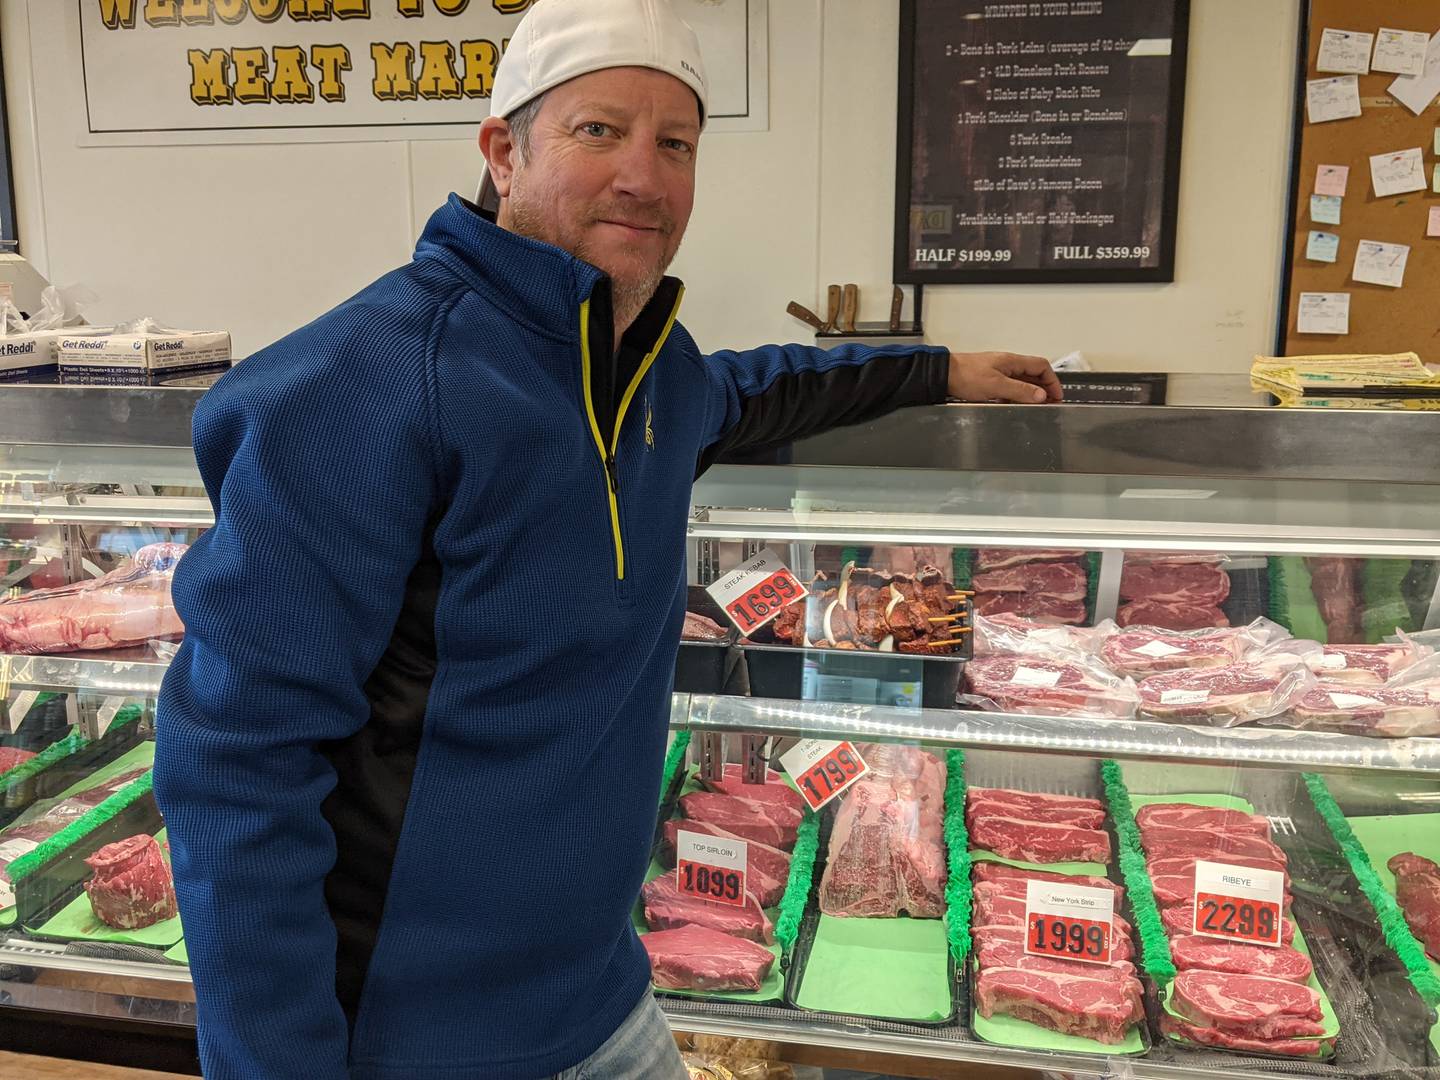 Dave Wellehan owns Dave's Meat Market in Yorkville, which has been in business for 23 years. He strives to sell high quality meat at reasonable prices.